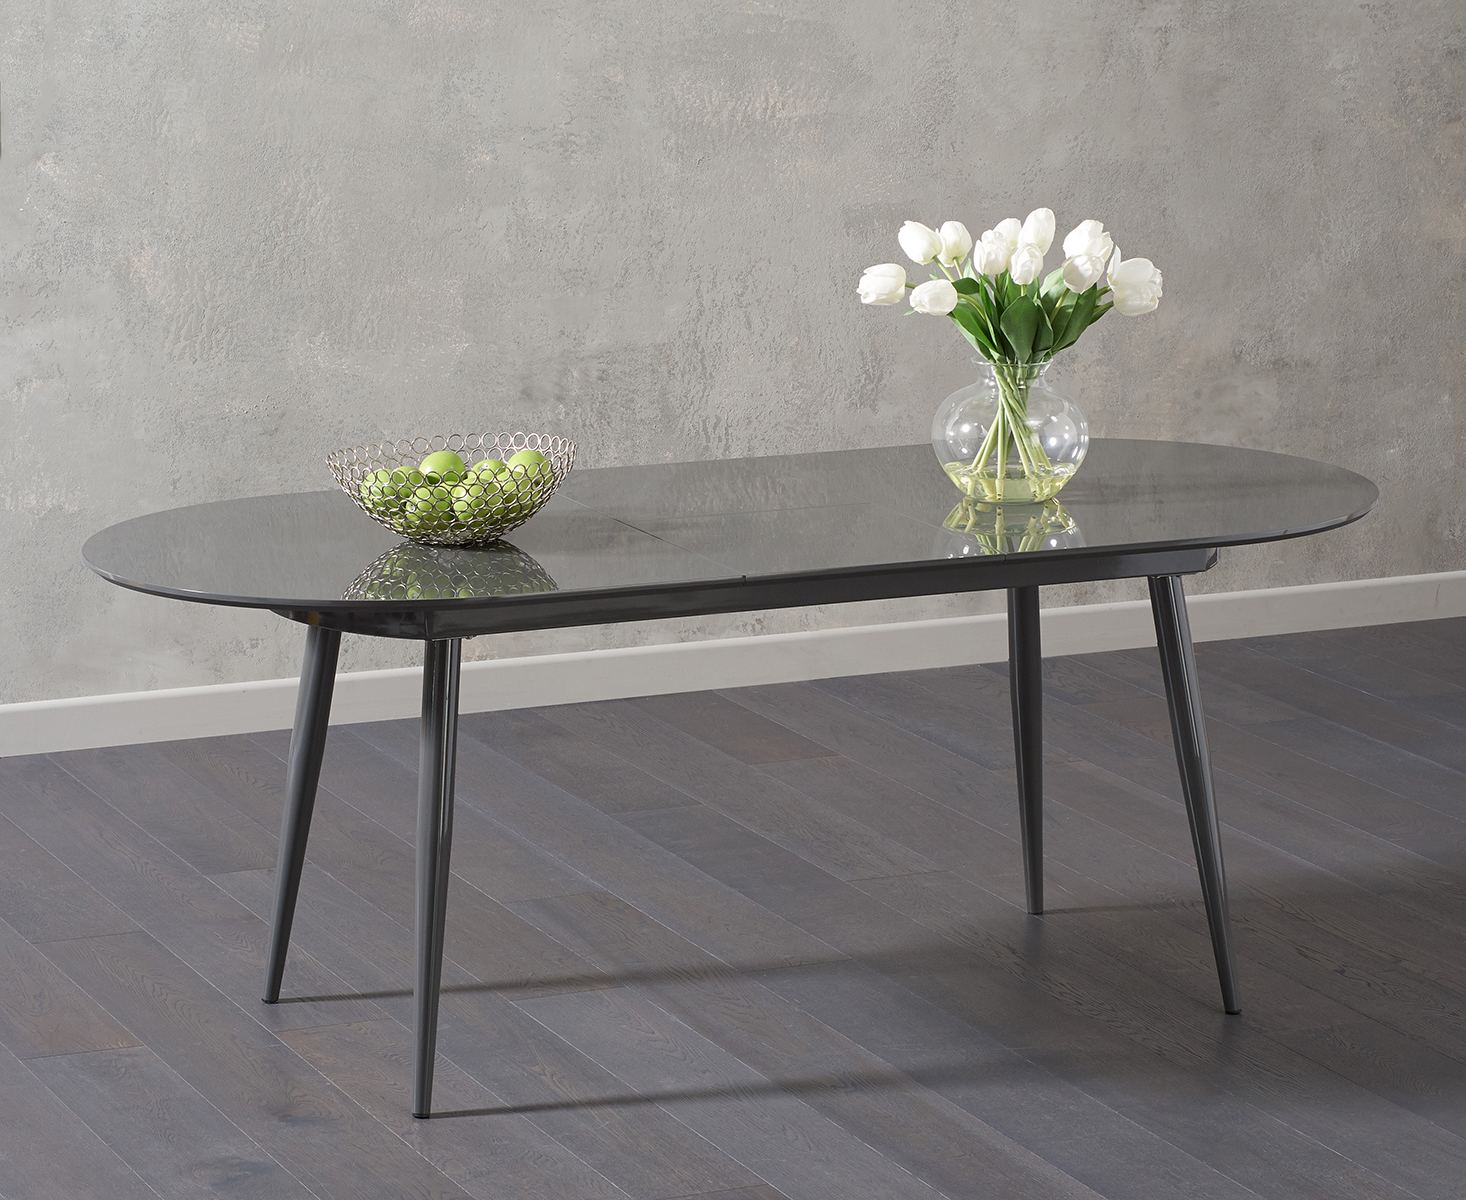 Photo 2 of Extending olivia dark grey high gloss dining table with 4 grey astrid chairs